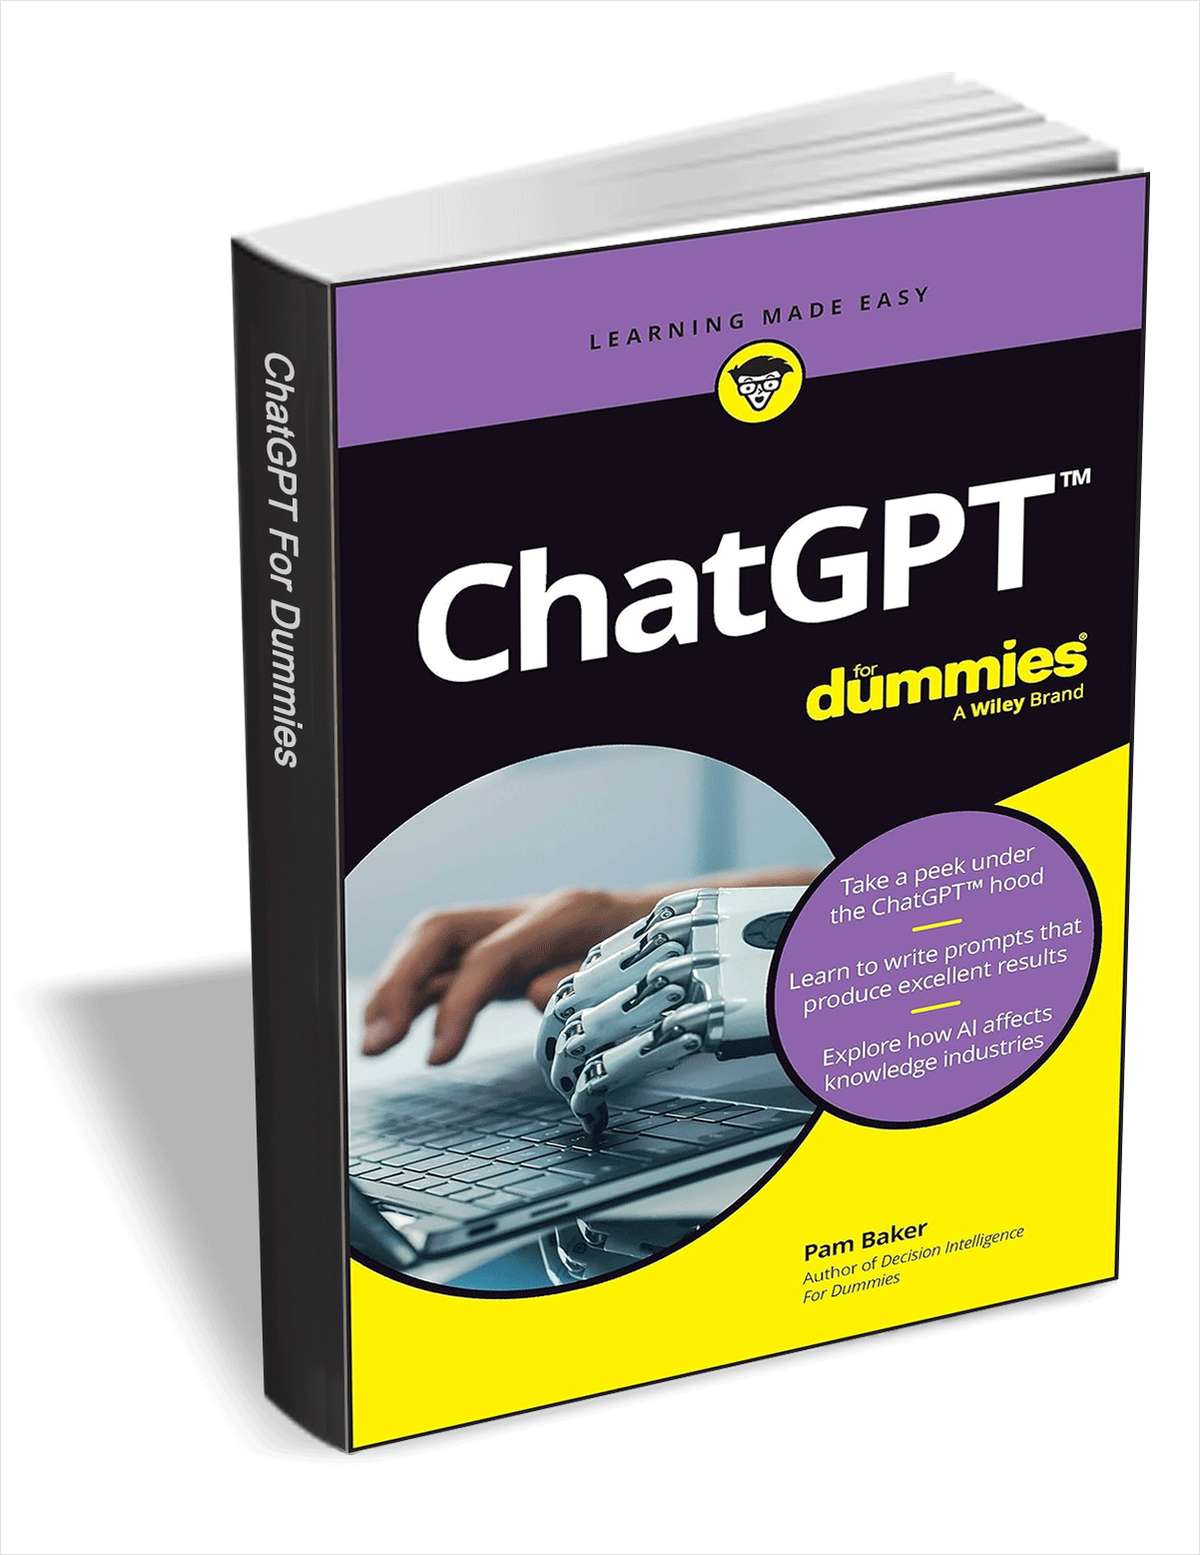 ChatGPT For Dummies ($12.00 Value) FREE for a Limited Time